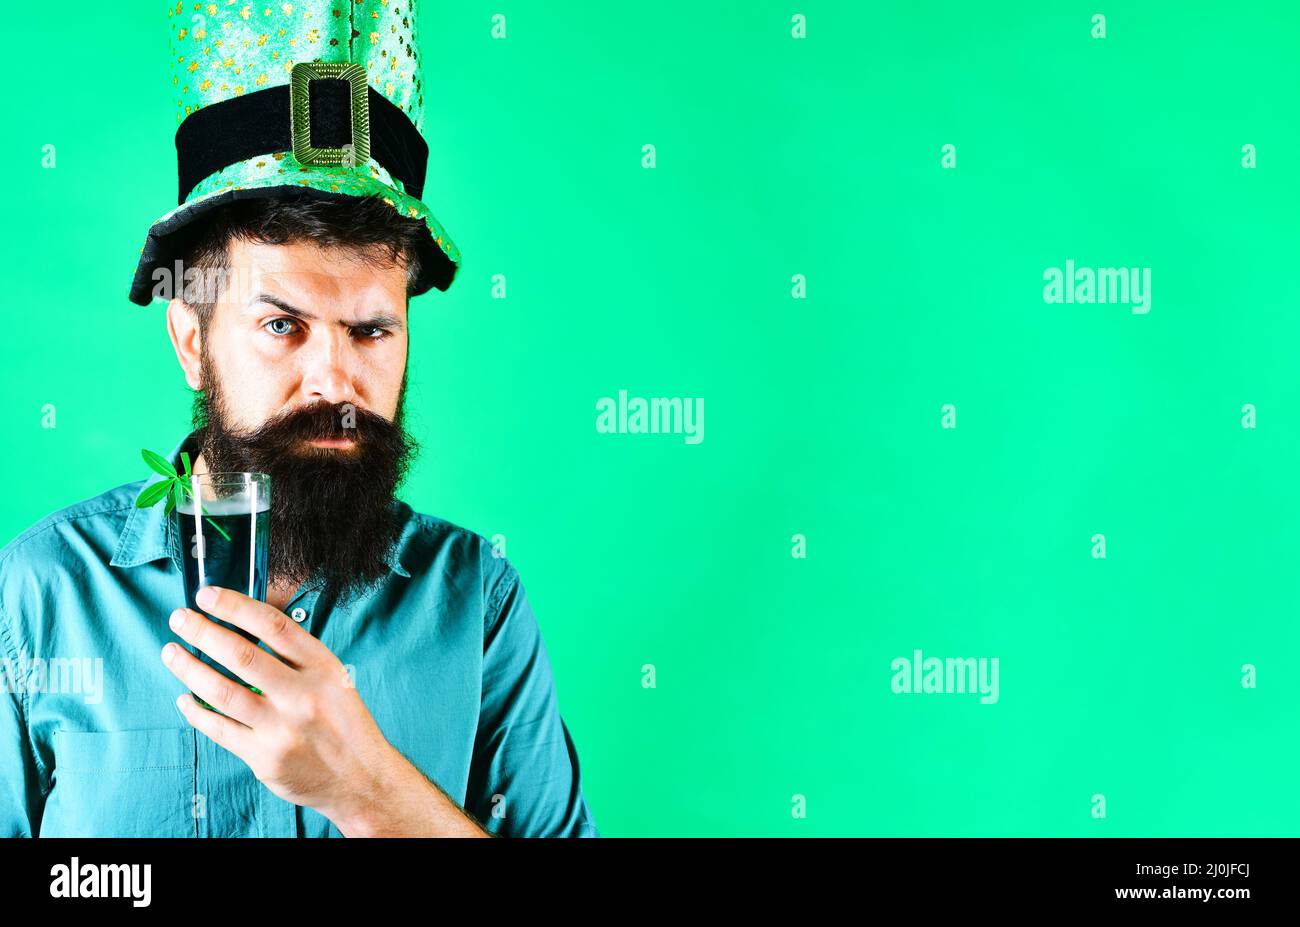 Serious man in green hat with glass of beer. Patricks Day pub party celebrating. Ireland tradition. Stock Photo